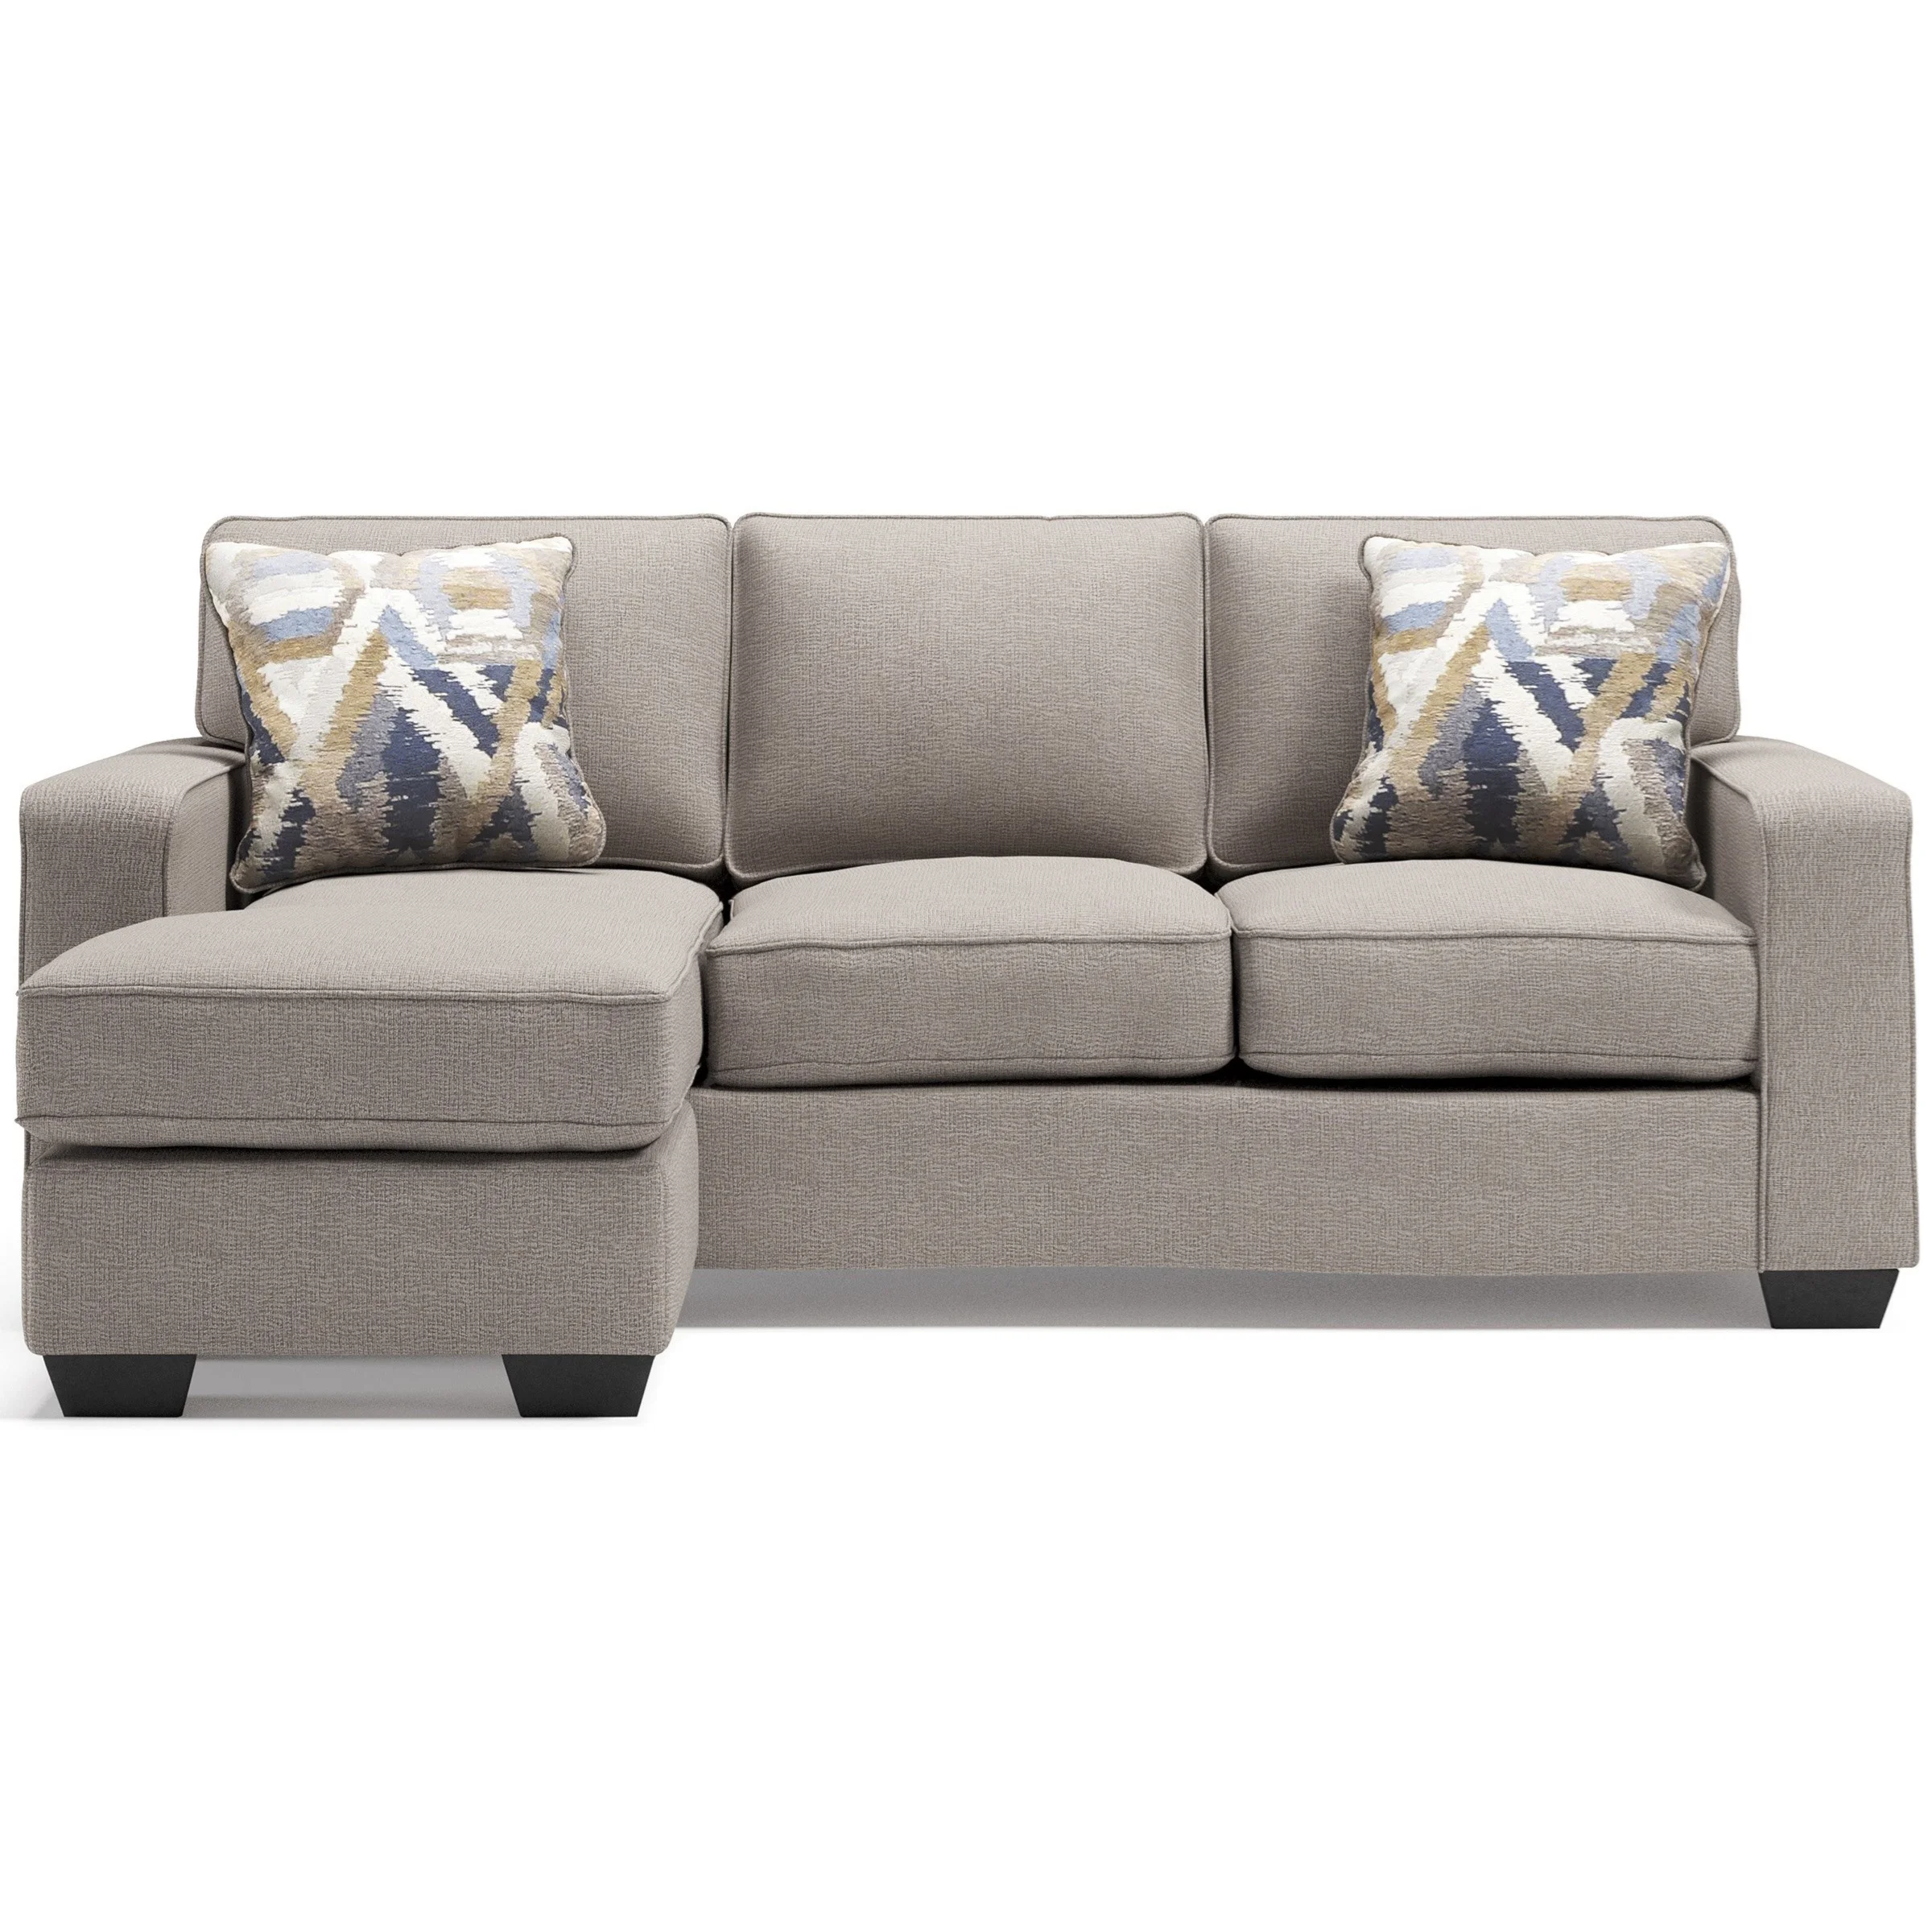 Couch Bed & Small Sofa With Foot Rest for Sale in Ontario, CA